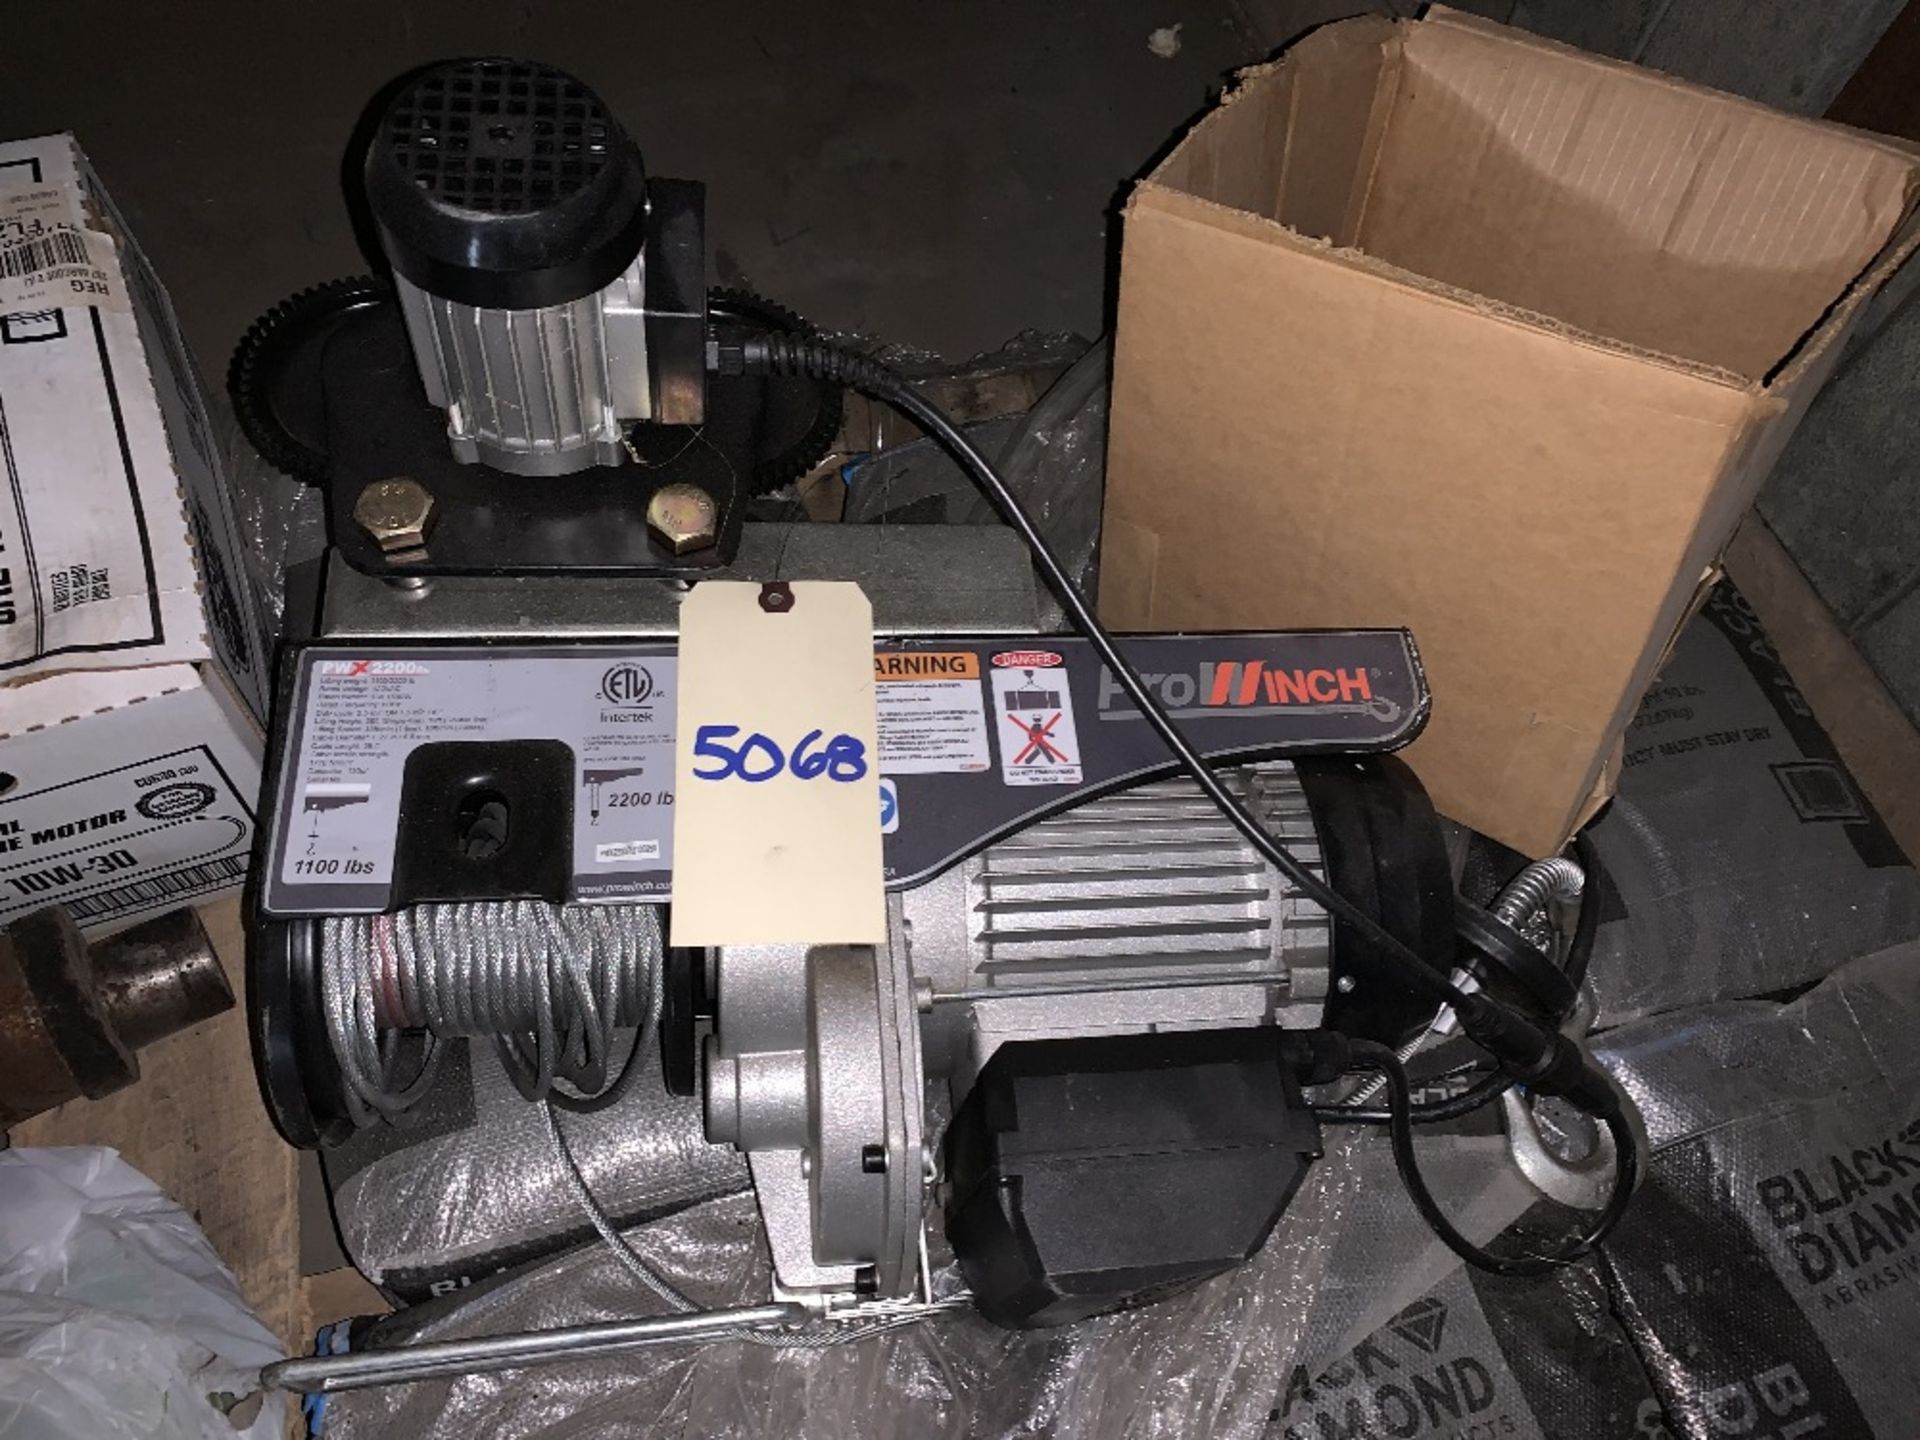 Canon City CO ProWinch PWX2200 electric winch for use on overhead cranes, purchased new but not